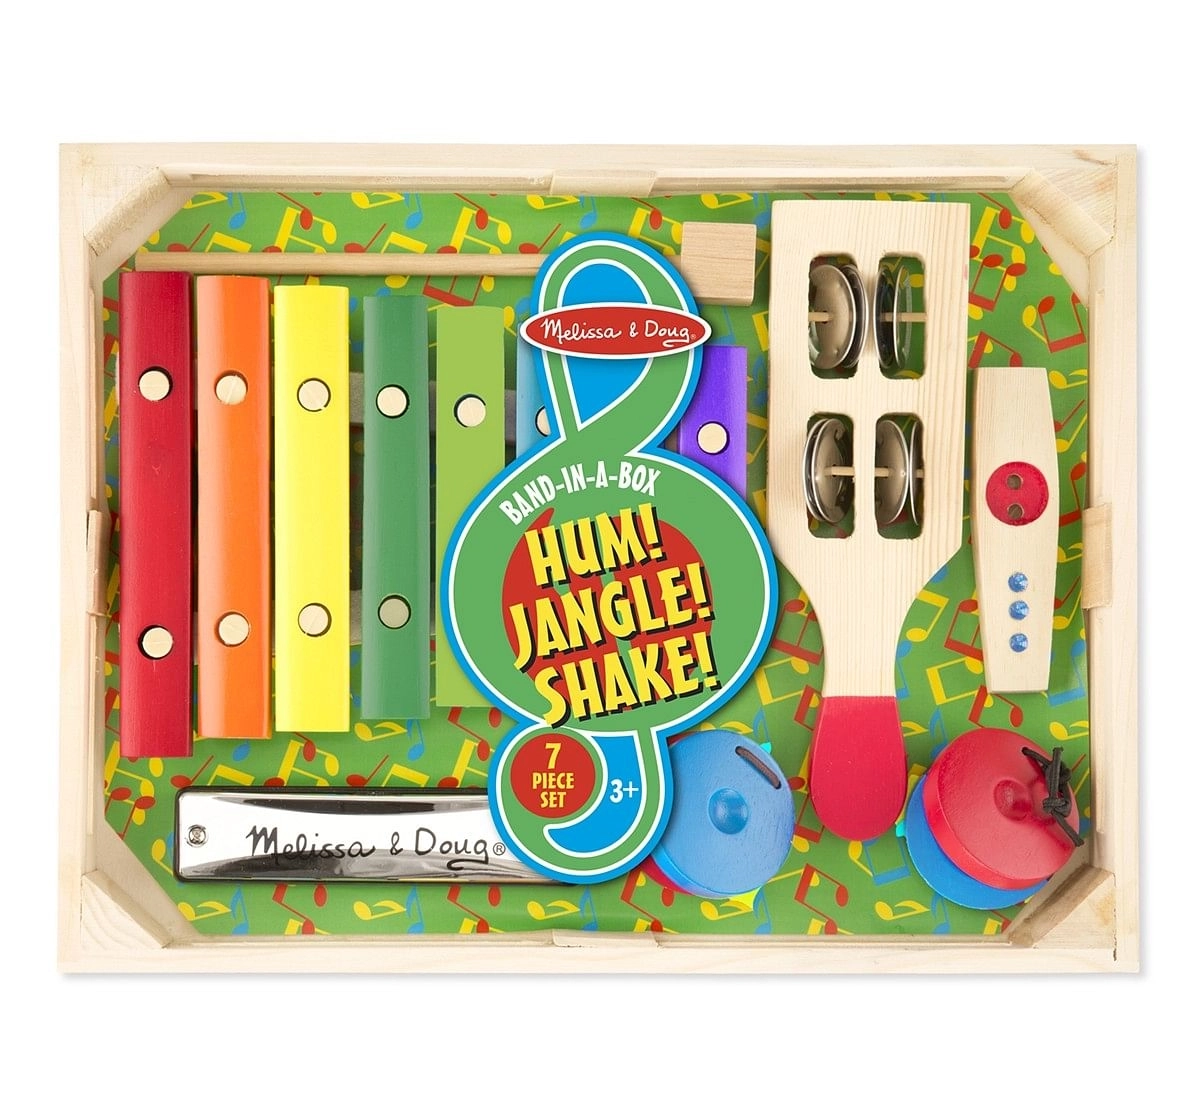 Melissa & Doug : Beginners band set Musical Toys for Kids age 3Y+ 